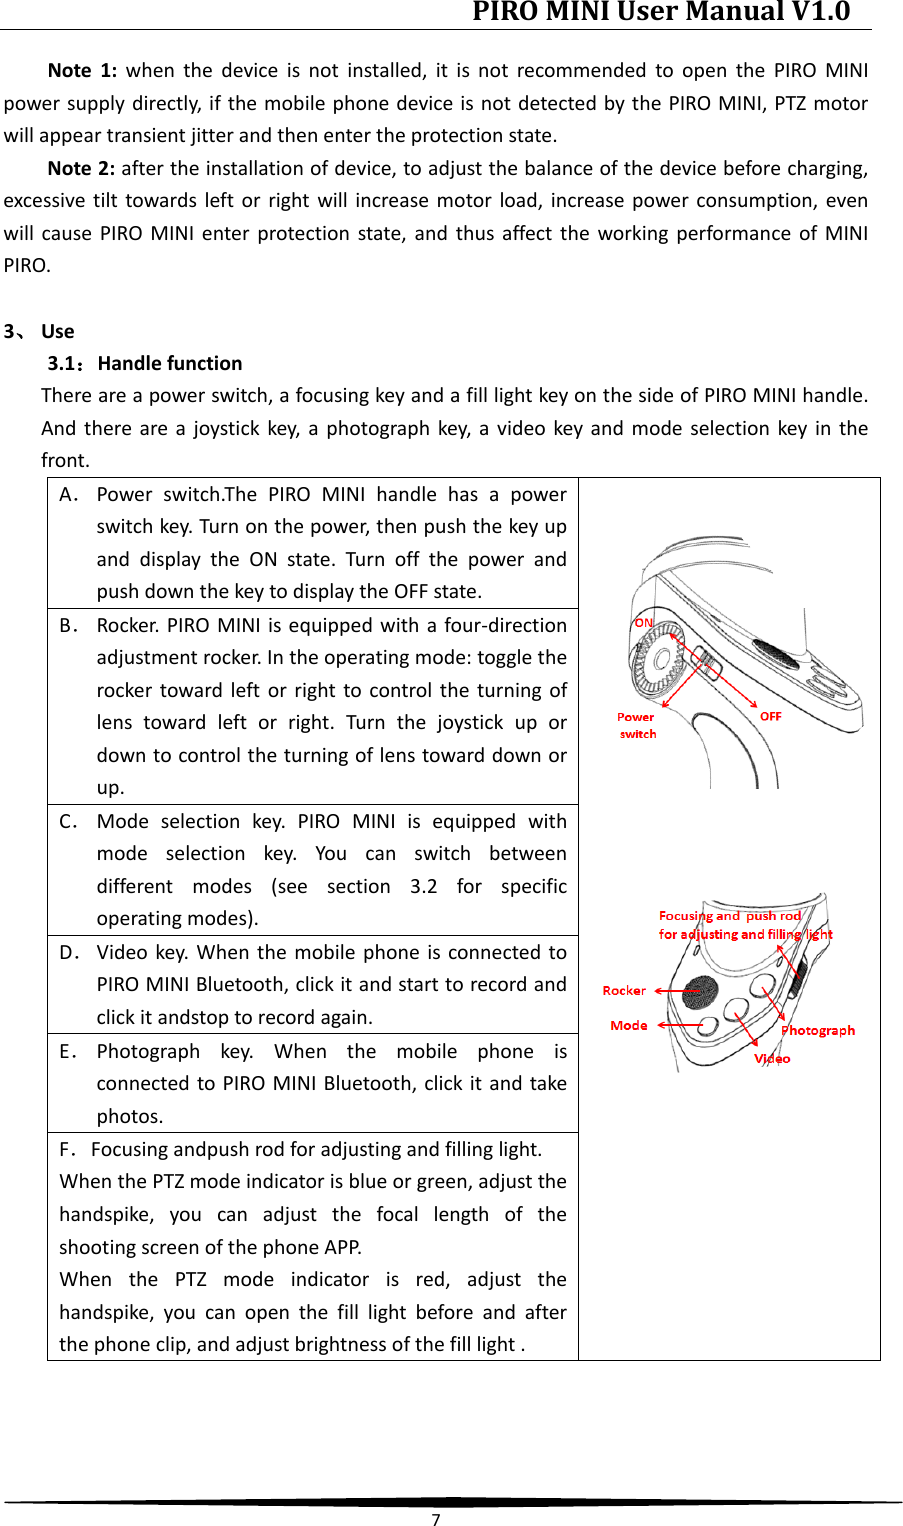 PIRO MINI User Manual V1.0  7  Note 1: when the device is not installed, it is not recommended to open the PIRO MINI power supply directly, if the mobile phone device is not detected by the PIRO MINI, PTZ motor will appear transient jitter and then enter the protection state. Note 2: after the installation of device, to adjust the balance of the device before charging, excessive tilt towards left or right will increase motor load, increase power consumption, even will cause PIRO MINI enter protection state, and thus affect the working performance of MINI PIRO.  3、 Use 3.1：Handle function There are a power switch, a focusing key and a fill light key on the side of PIRO MINI handle. And there are a joystick key, a photograph key, a video key and mode selection key in the front. A． Power switch.The PIRO MINI handle has a power switch key. Turn on the power, then push the key up and display the ON state. Turn off the power and push down the key to display the OFF state.      B． Rocker. PIRO MINI is equipped with a four-direction adjustment rocker. In the operating mode: toggle the rocker toward left or right to control the turning of lens toward left or right. Turn the joystick up or down to control the turning of lens toward down or up. C． Mode selection key. PIRO MINI is equipped with mode selection key. You can switch between different modes (see section 3.2 for specific operating modes). D． Video key. When the mobile phone is connected to PIRO MINI Bluetooth, click it and start to record and click it andstop to record again. E． Photograph key. When the mobile phone is connected to PIRO MINI Bluetooth, click it and take photos. F．Focusing andpush rod for adjusting and filling light. When the PTZ mode indicator is blue or green, adjust the handspike, you can adjust the focal length of the shooting screen of the phone APP. When the PTZ mode indicator is red, adjust the handspike, you can open the fill light before and after the phone clip, and adjust brightness of the fill light .    